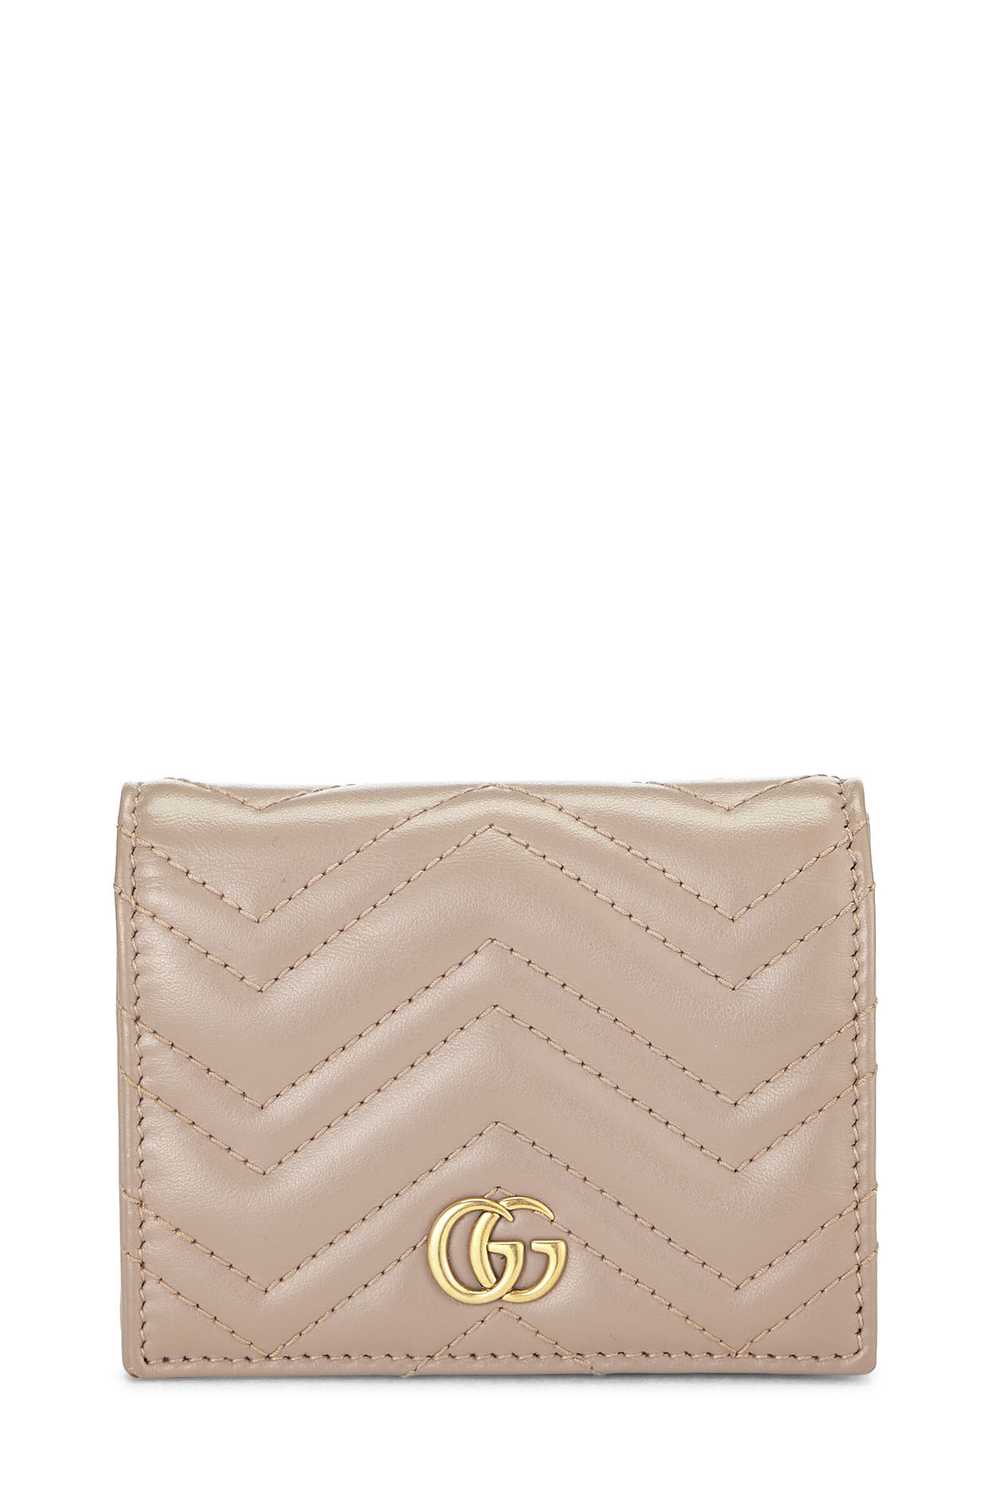 Pink Leather GG Marmont Compact Wallet - image 1